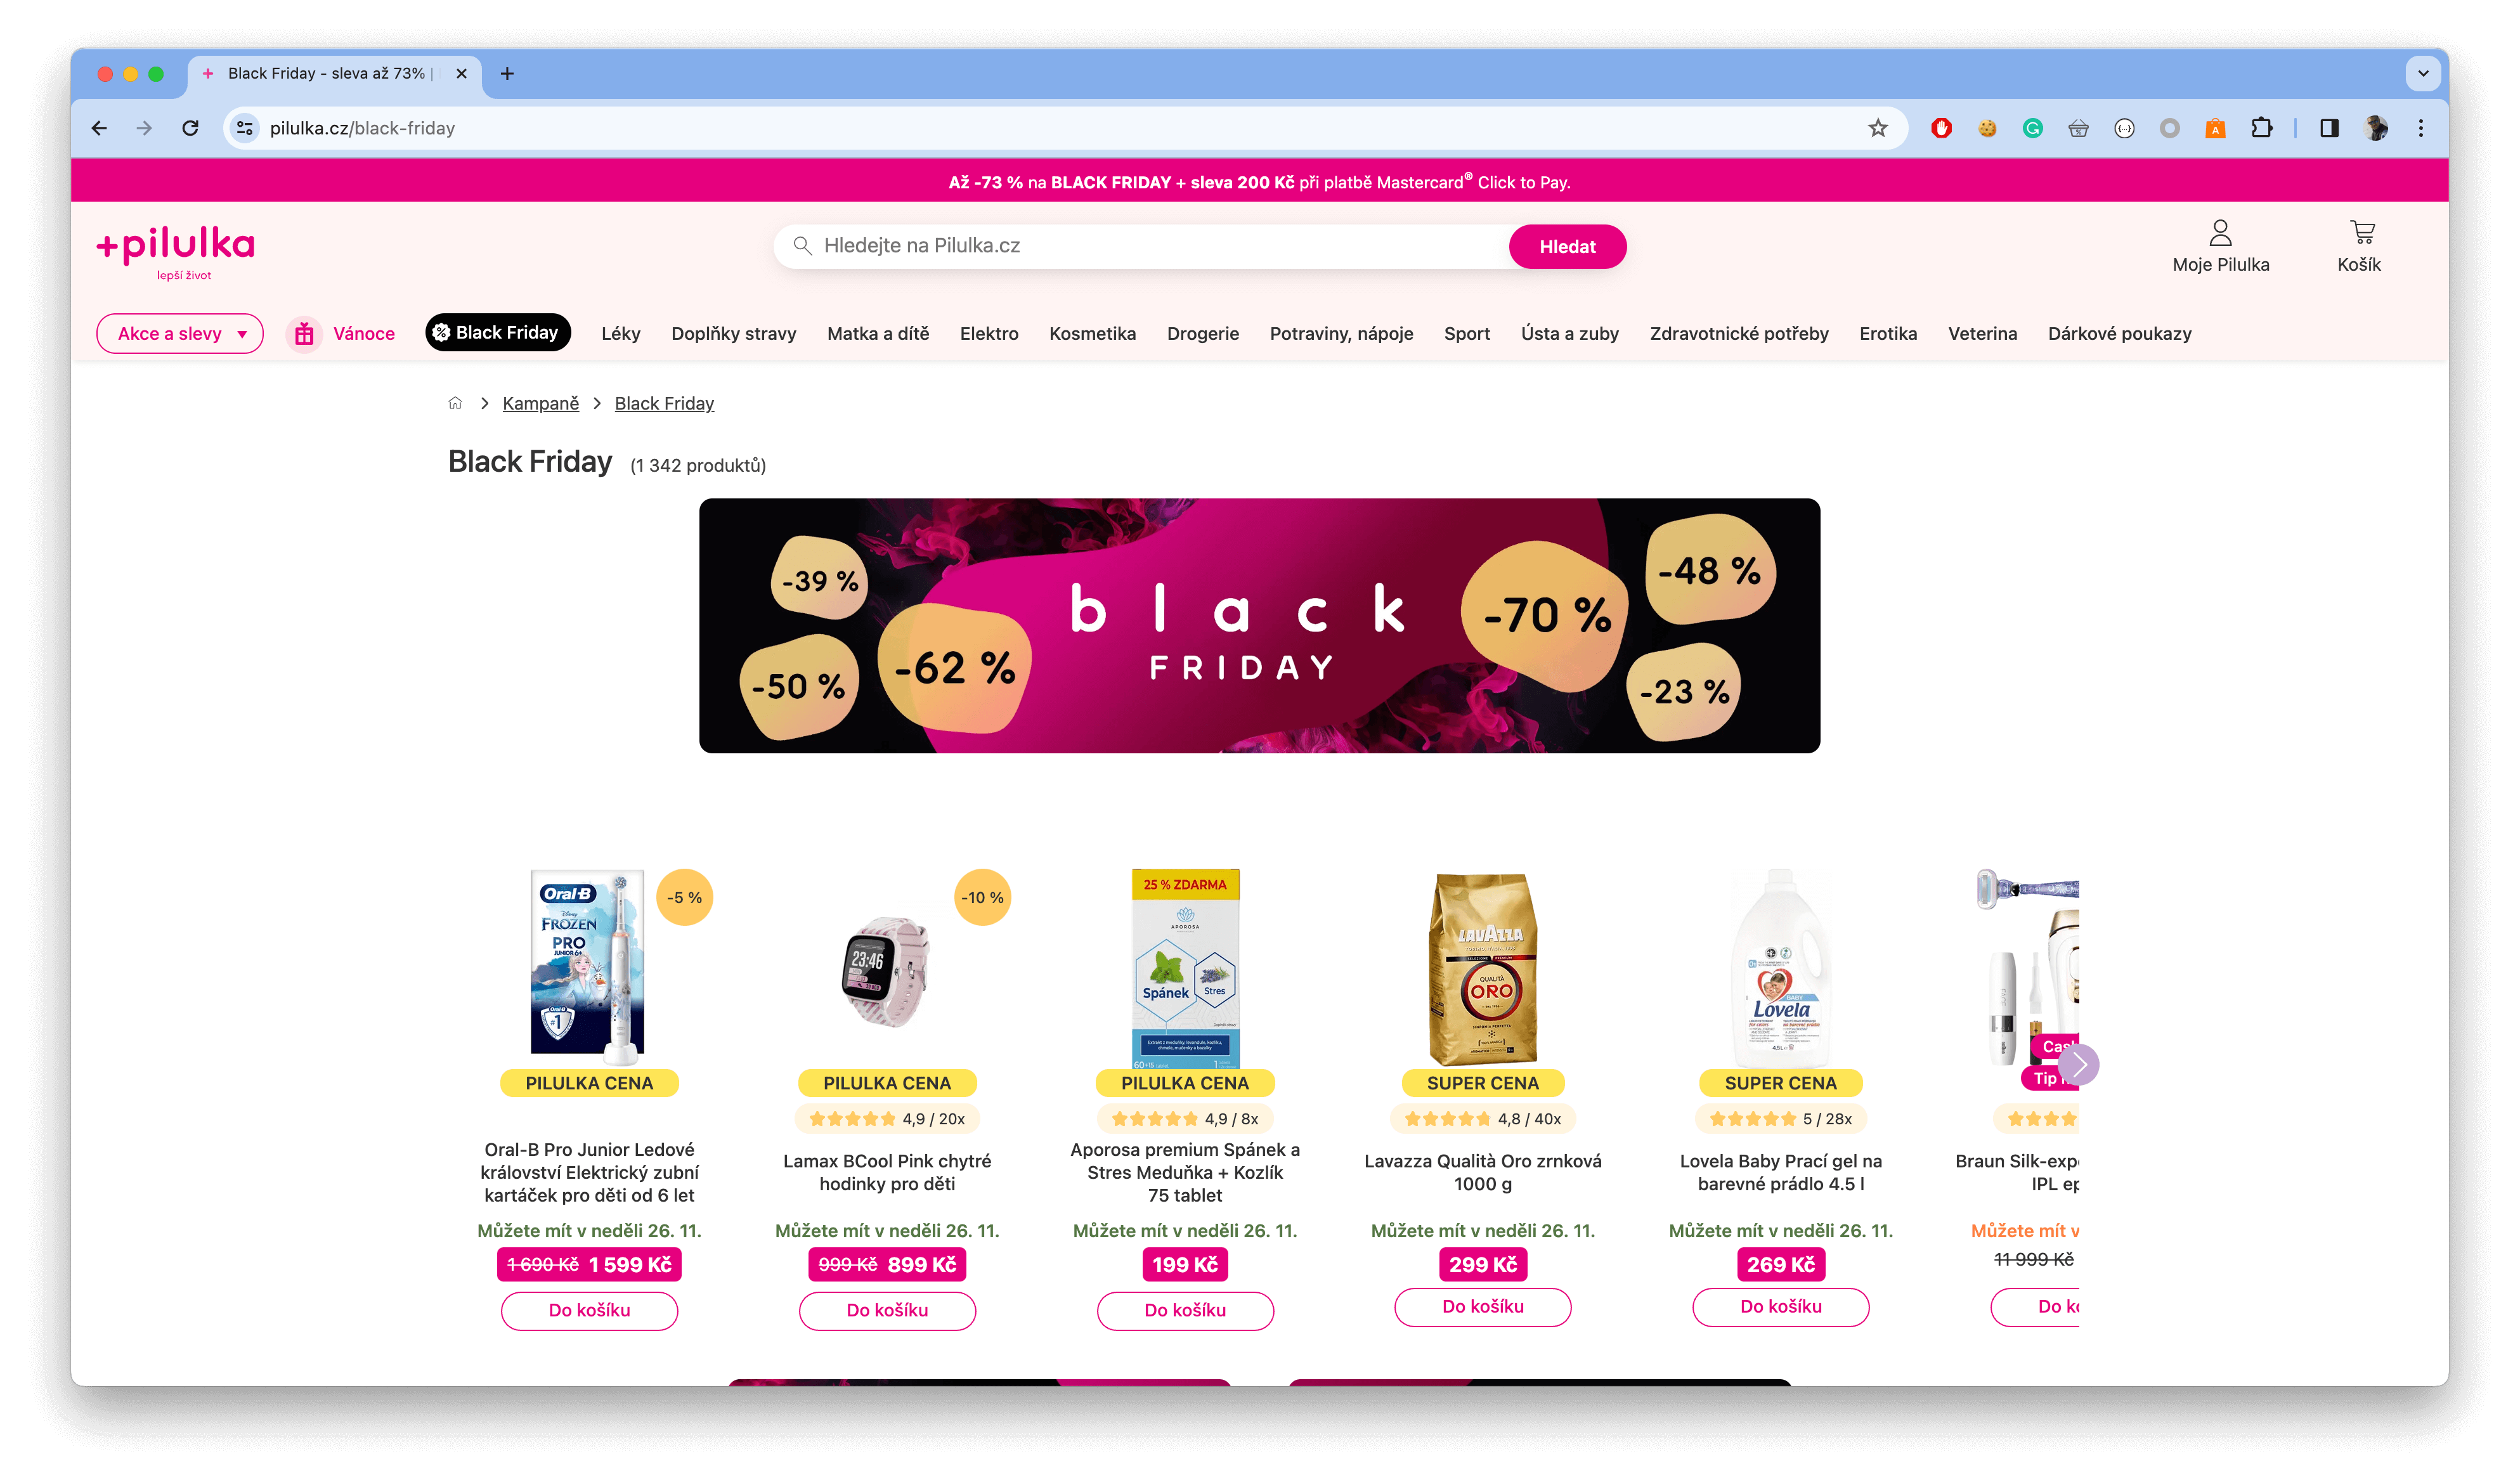 Pilulka.cz does not provide a reference price on Black Friday 2023